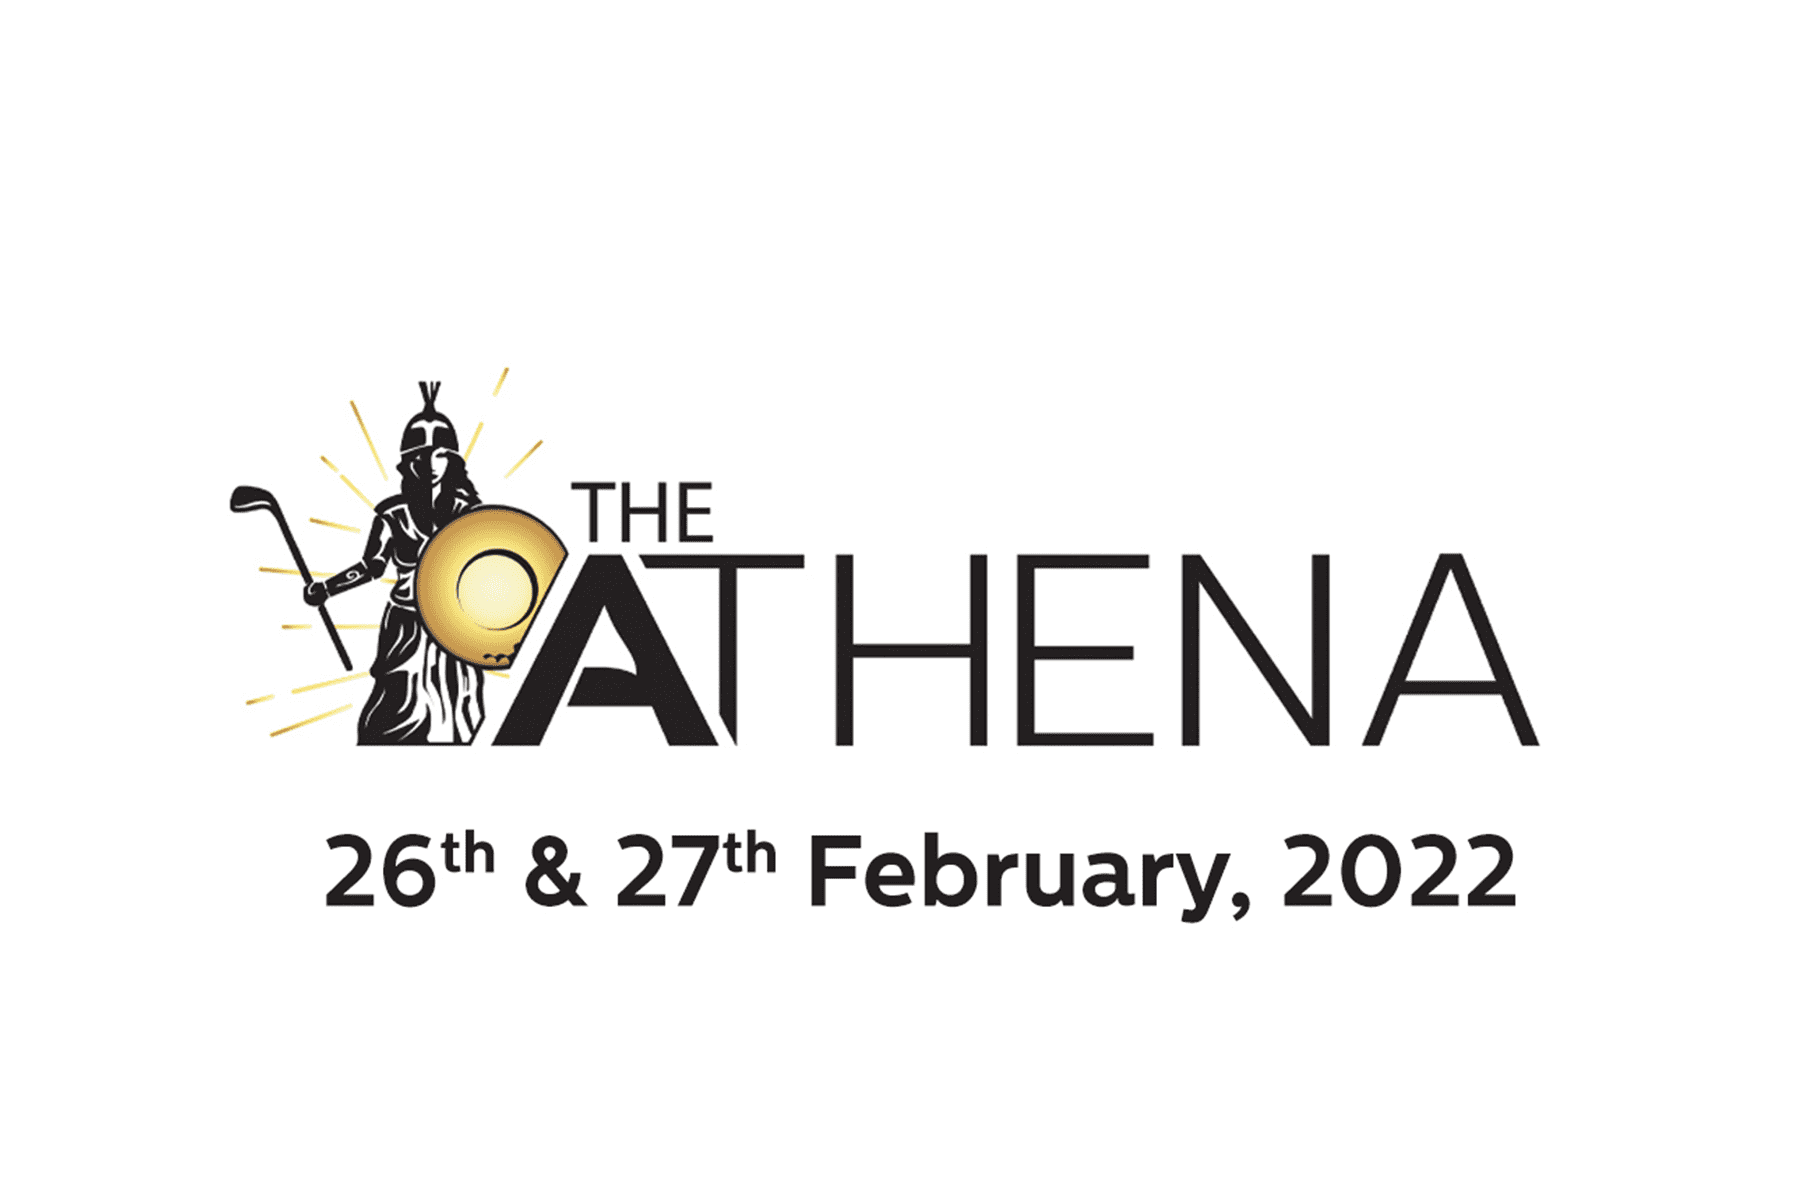 The Athena returns in 2022 with a twist